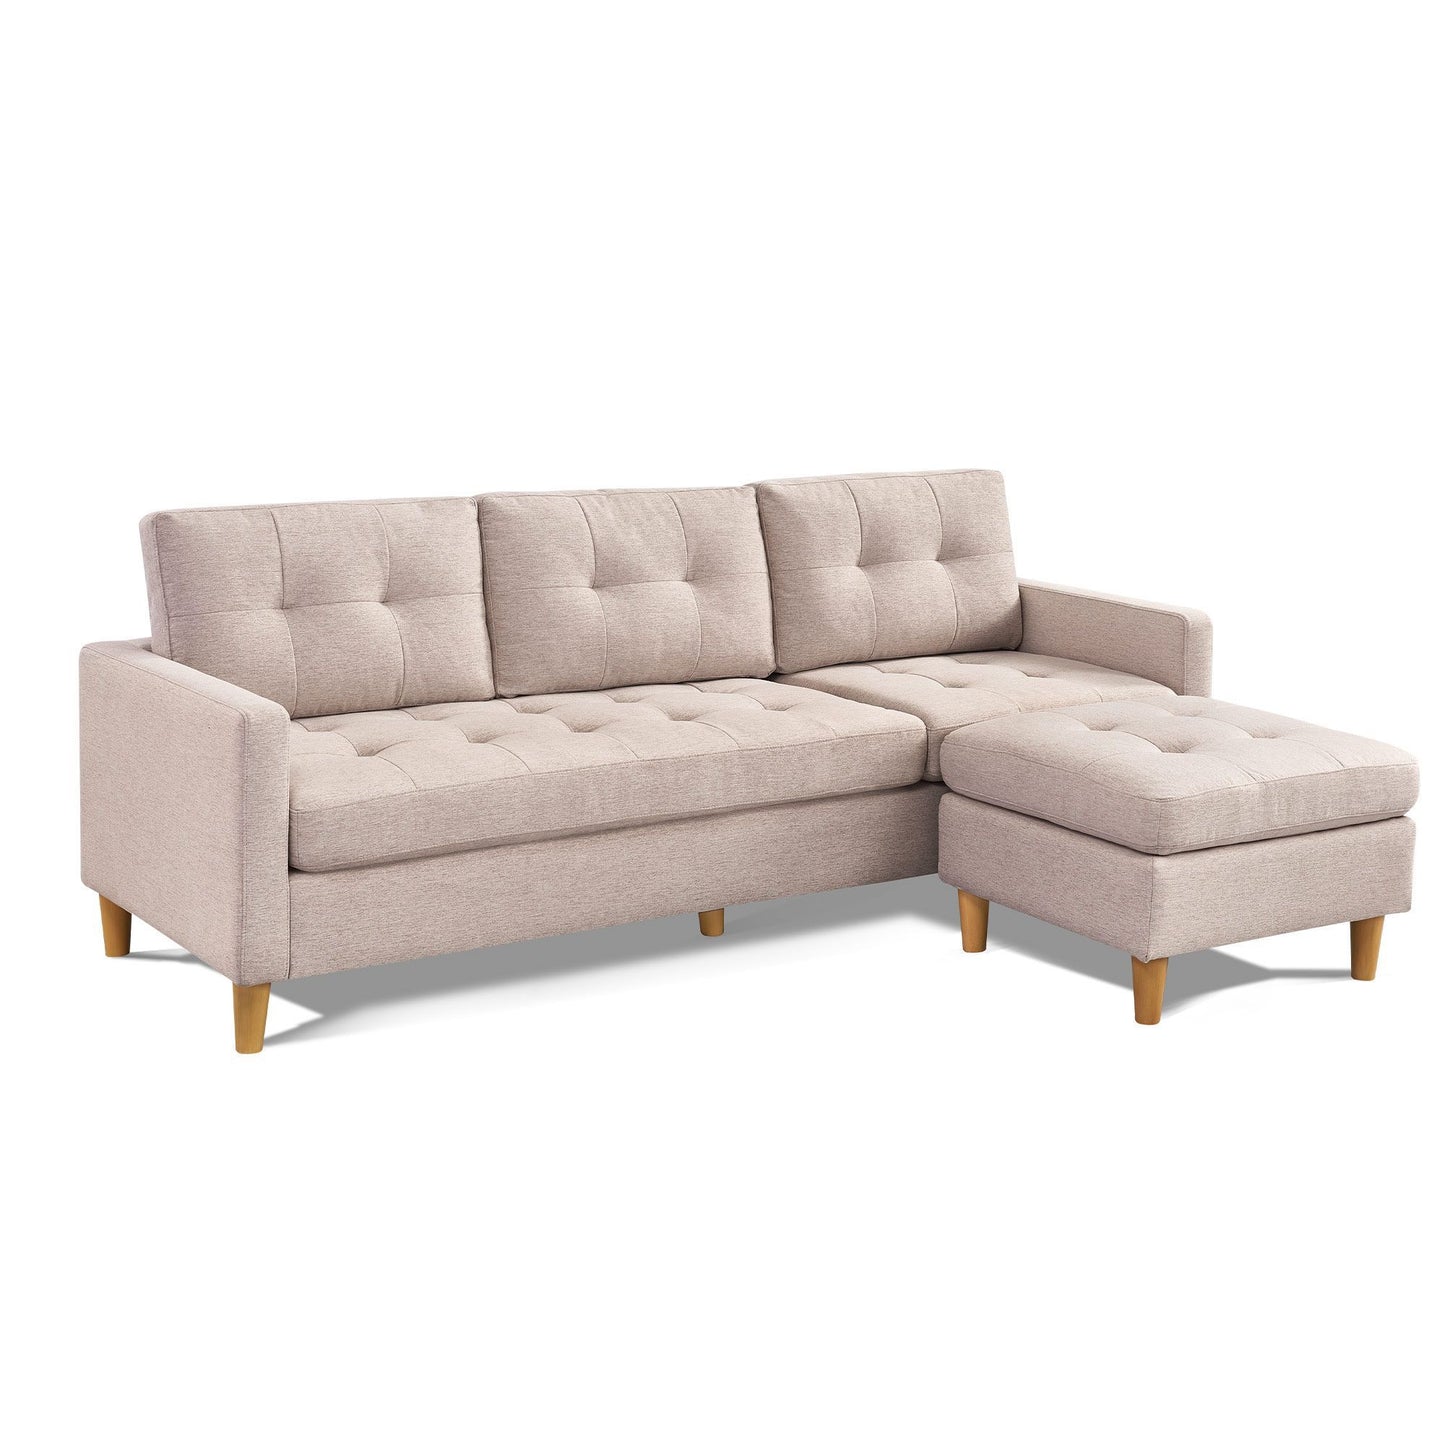 87" Beige Polyester Blend Sofa With Ottoman With Natural Legs